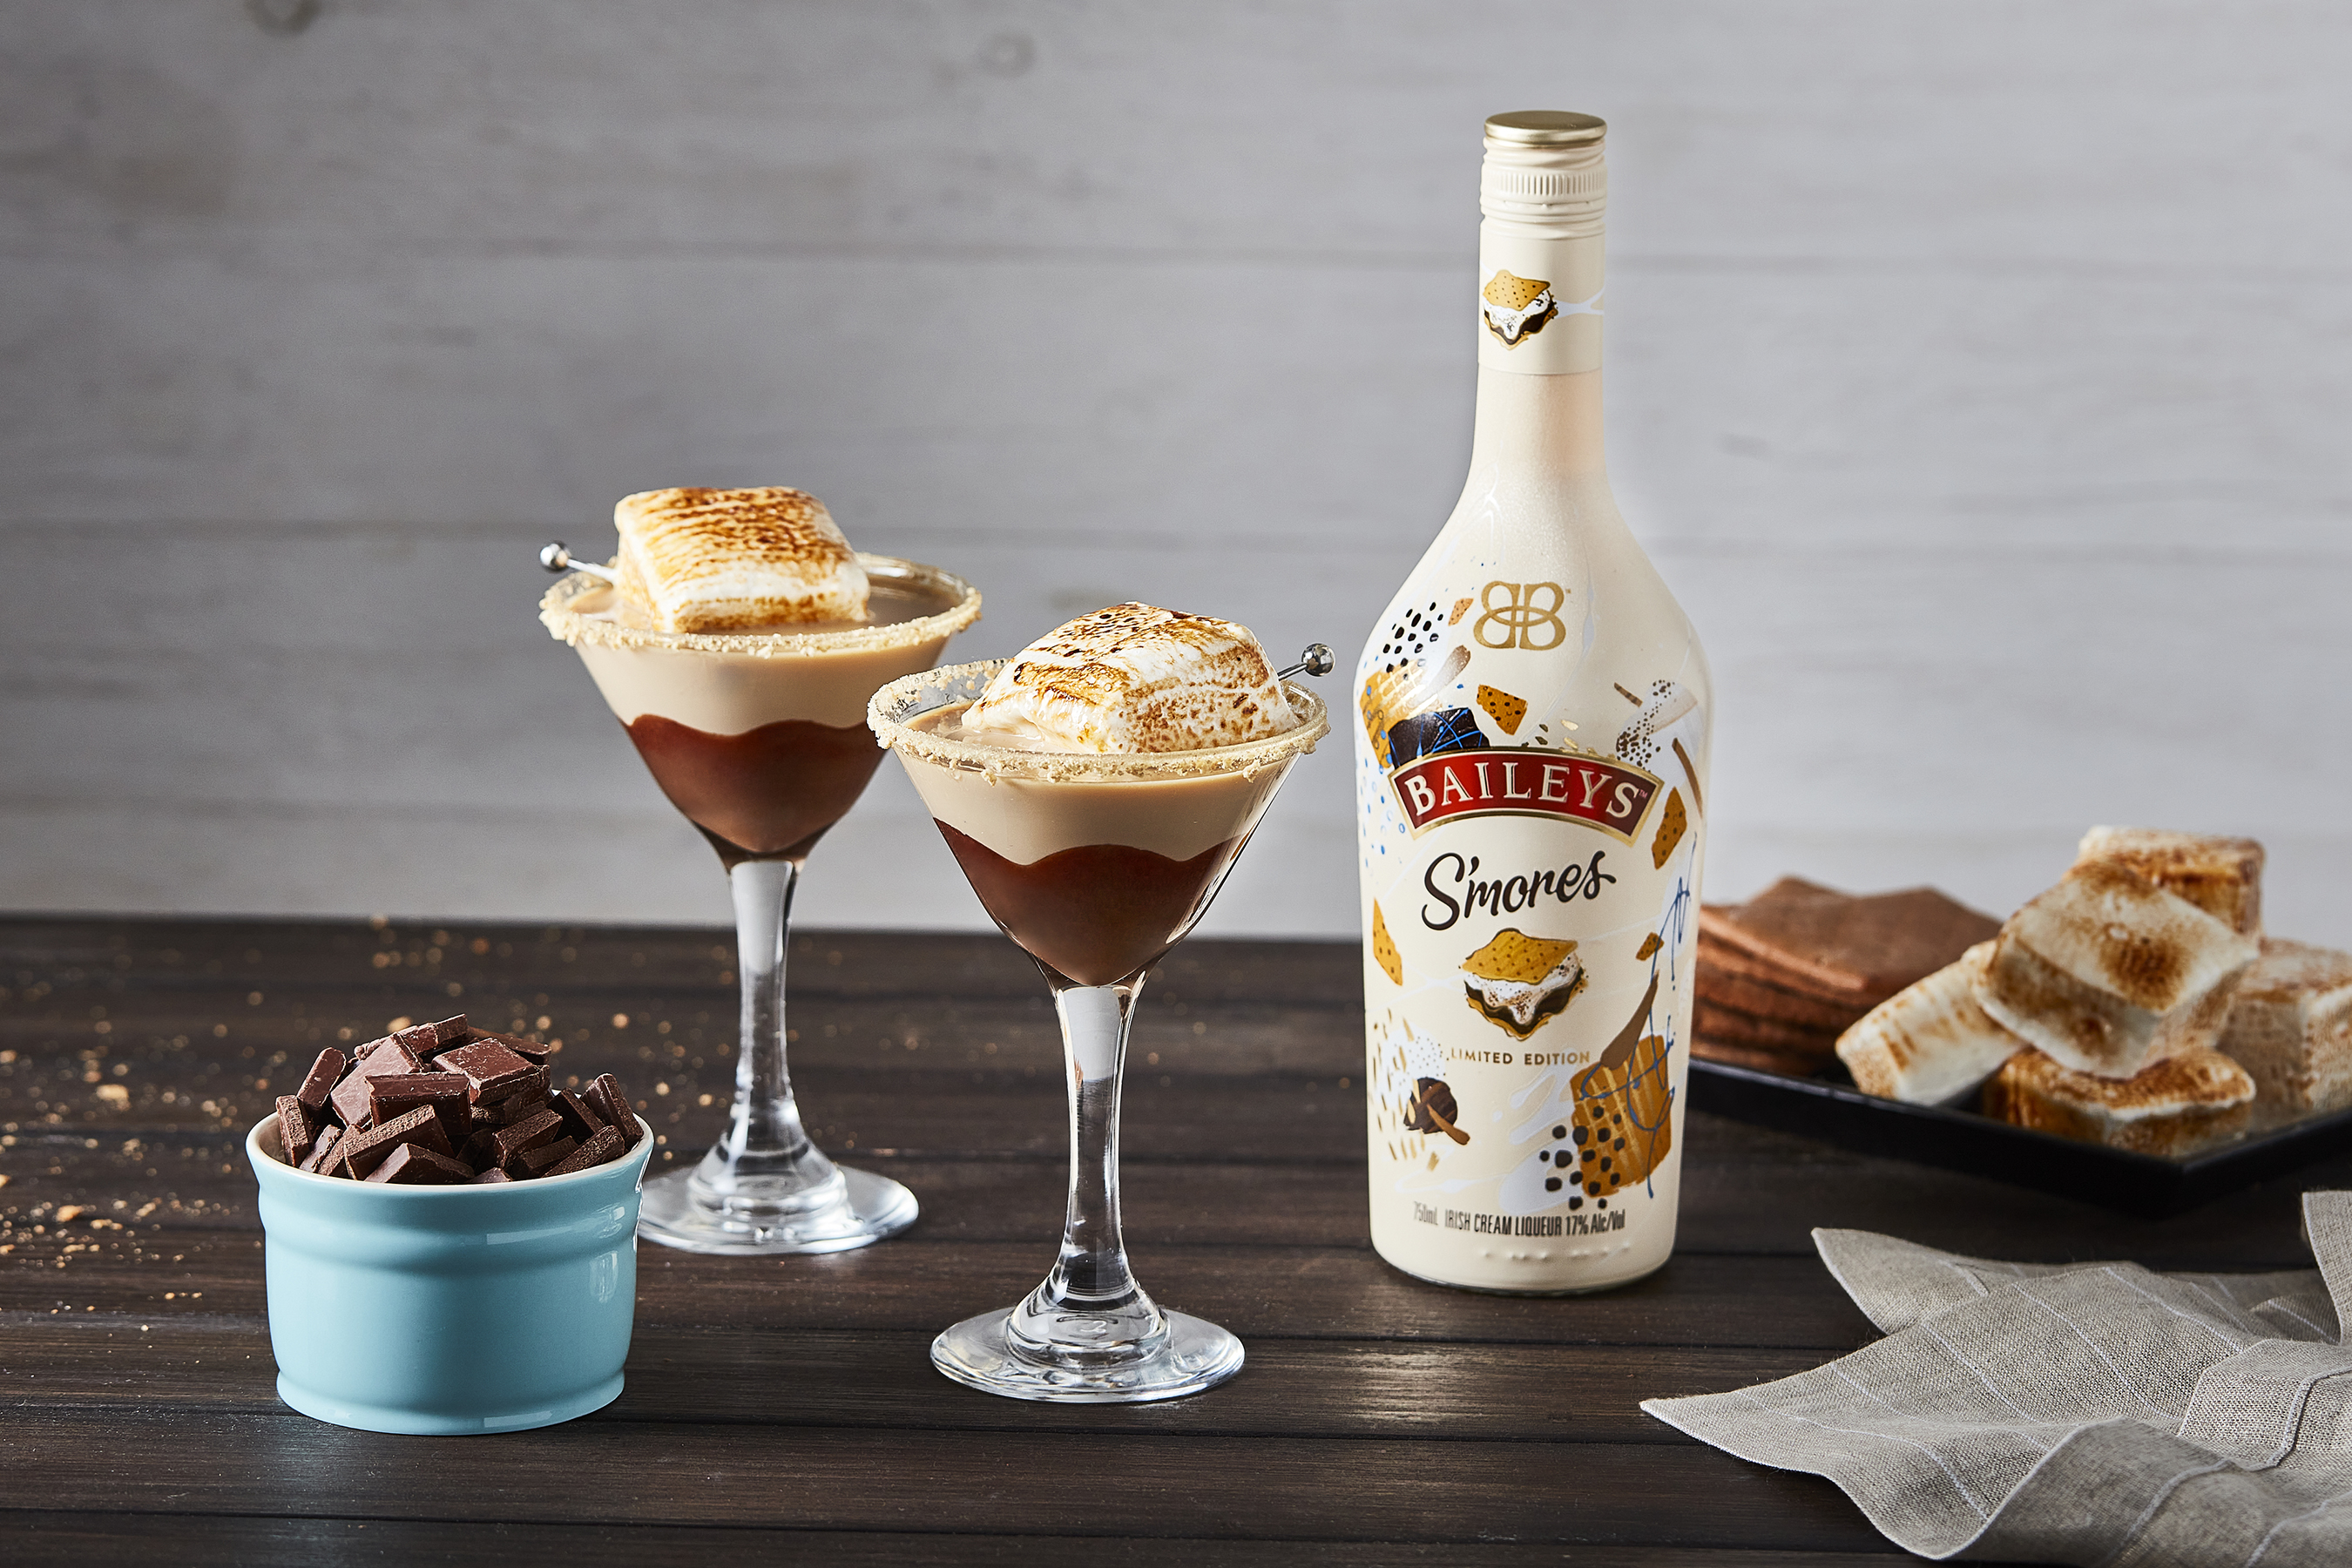 FIRE UP THE SUMMER VIBES WITH THE RETURN OF BAILEYS S'MORES LIQUEUR, A LIMITED TIME OFFERING THAT BRINGS BACK THE NOSTALGIC TASTE OF WARMER MONTHS AHEAD